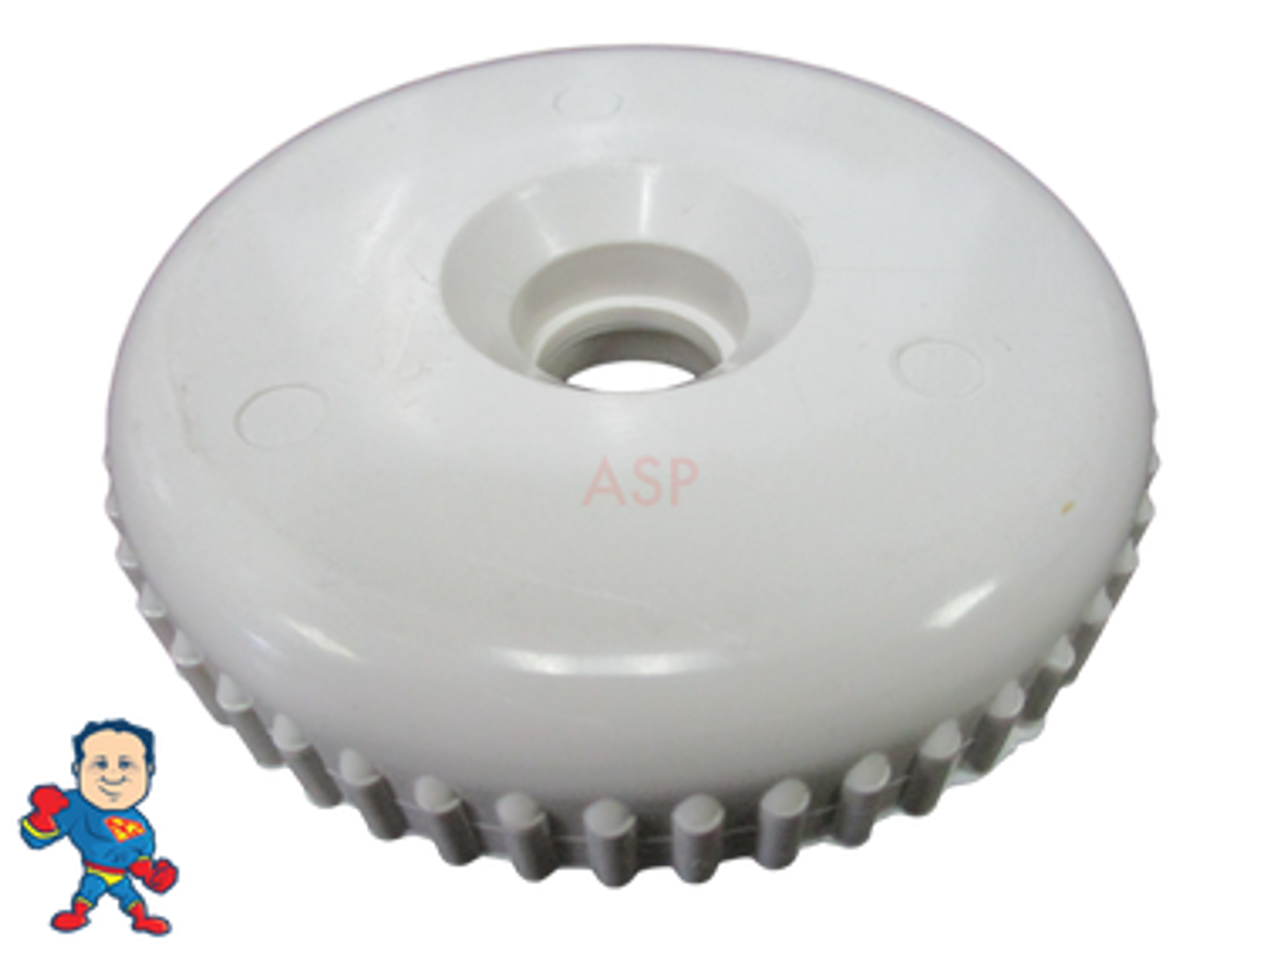 Cal Spa Diverter "BUTTRESS" Cap 3 1/2" Valve Hot Tub White How To VideoYour part will not have BUTTRESS written on the inside in black writing, this was for illustration purposes only. Be sure to look and feel on the inside for the word BUTTRESS.